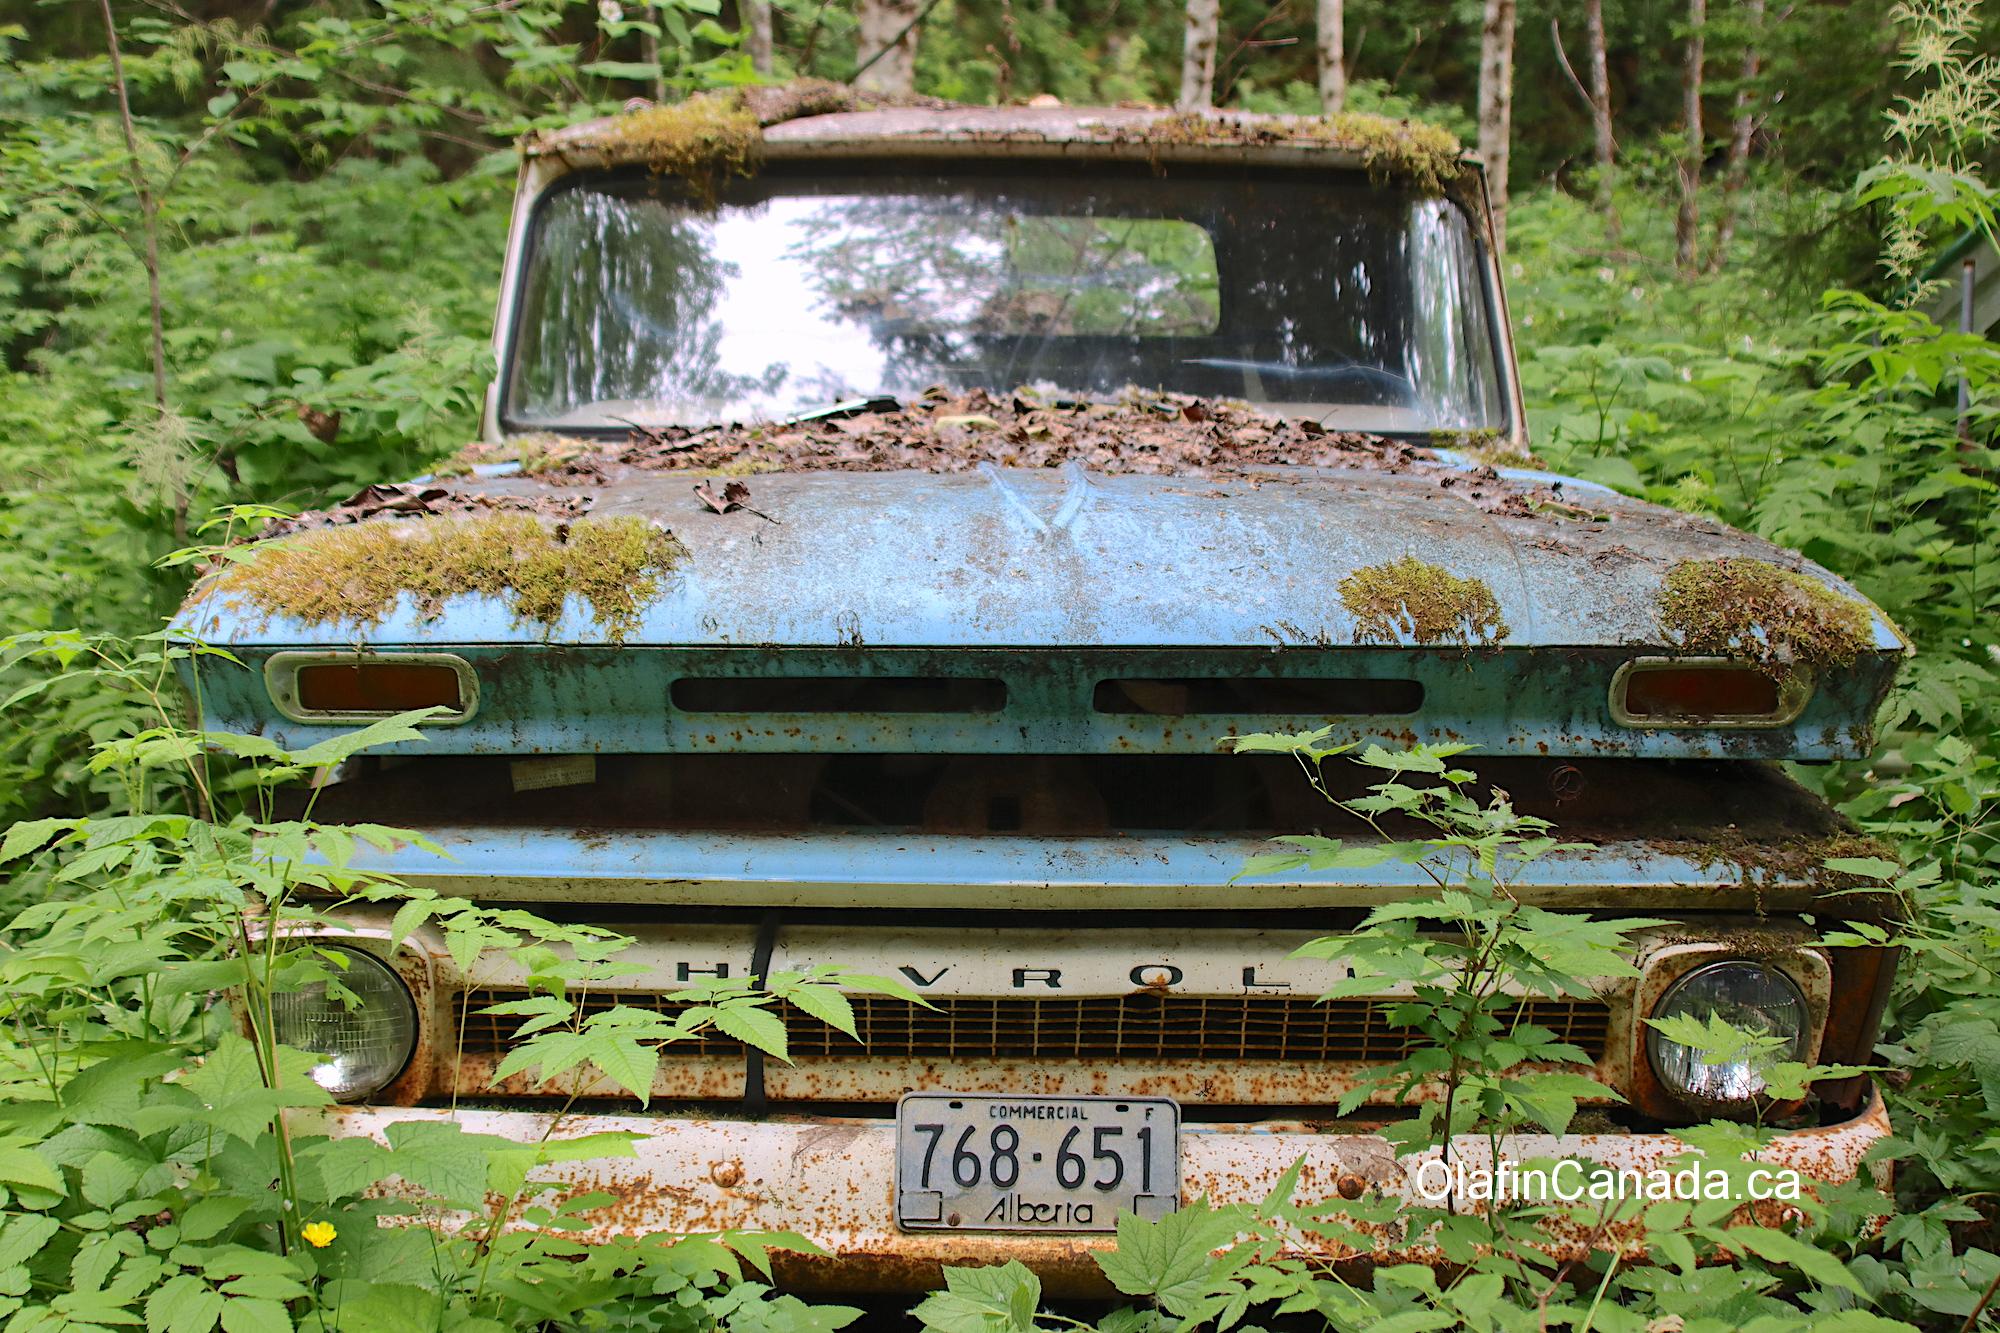 Chevrolet pick up from the 1960s in Alice Arm BC #olafincanada #britishcolumbia #discoverbc #abandonedbc #alicearm #pickup #truck